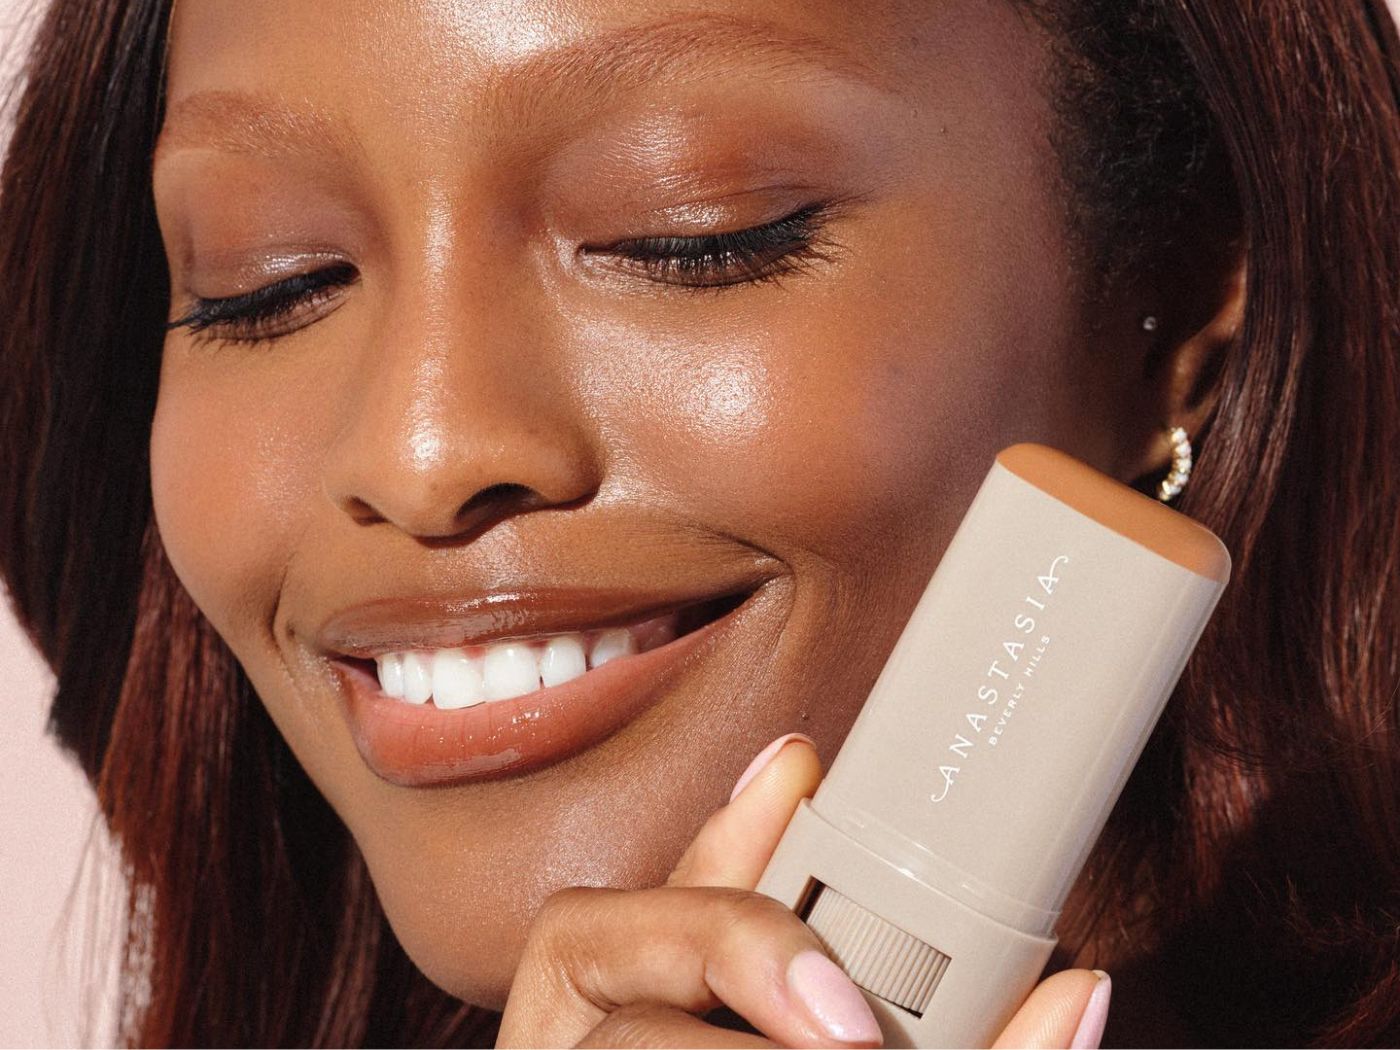 Model holds an Anastasia Beverly Hills Beauty Balm stick against her face.